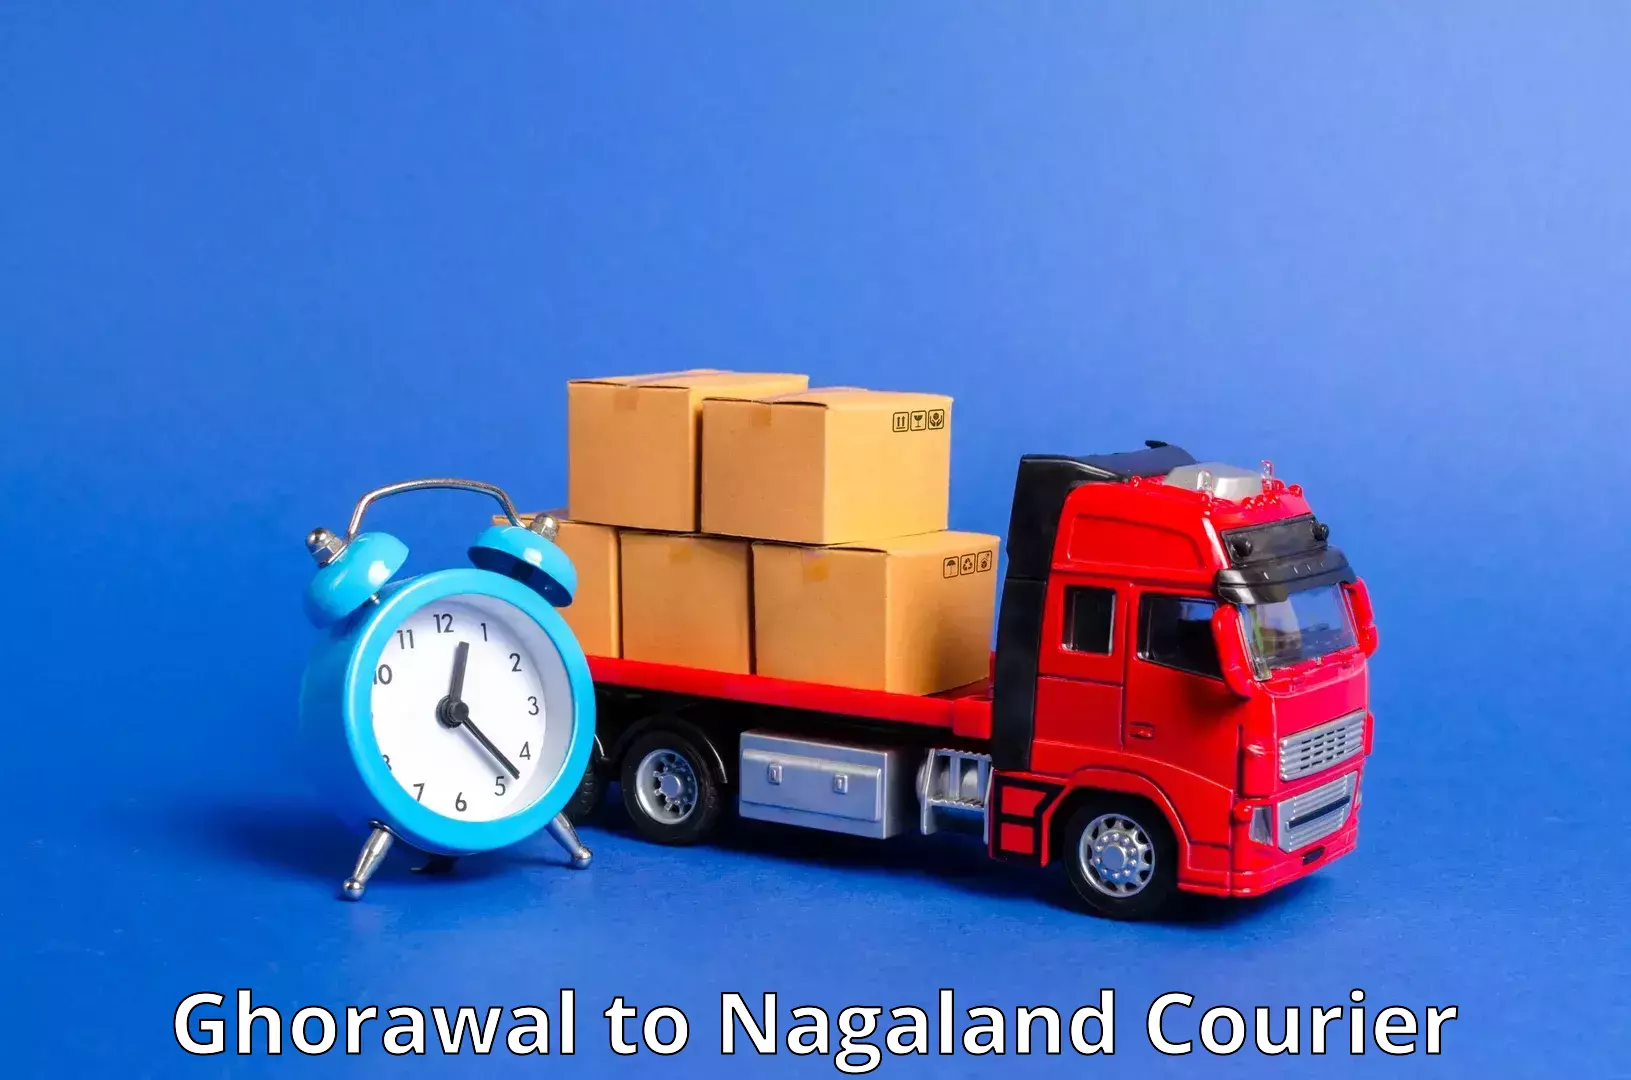 Round-the-clock parcel delivery in Ghorawal to Nagaland